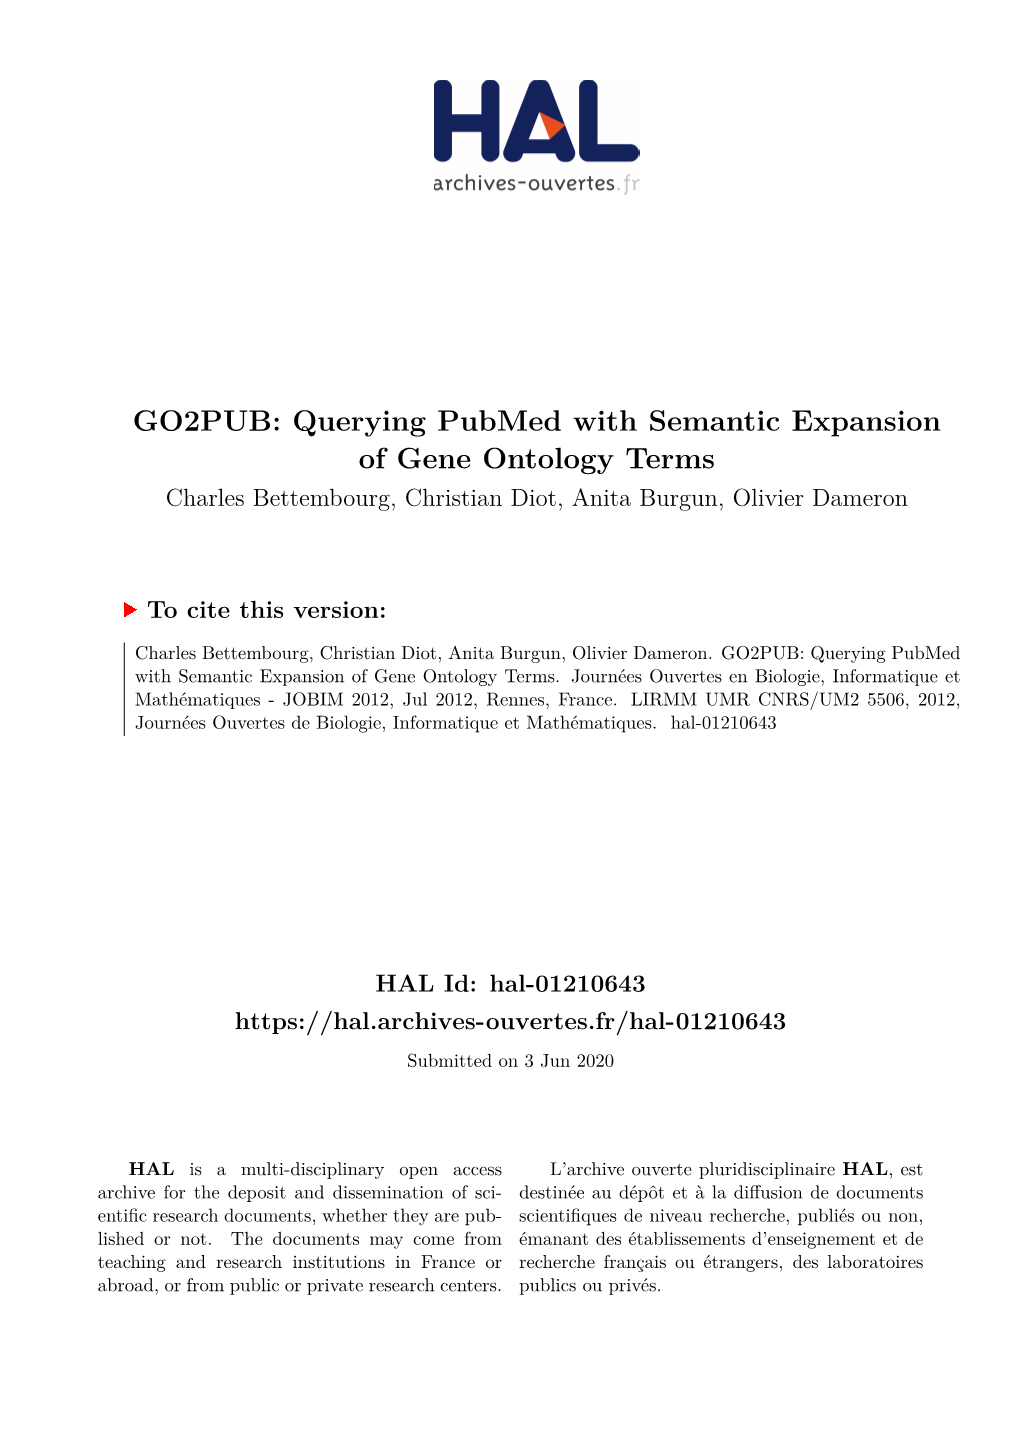 Querying Pubmed with Semantic Expansion of Gene Ontology Terms Charles Bettembourg, Christian Diot, Anita Burgun, Olivier Dameron